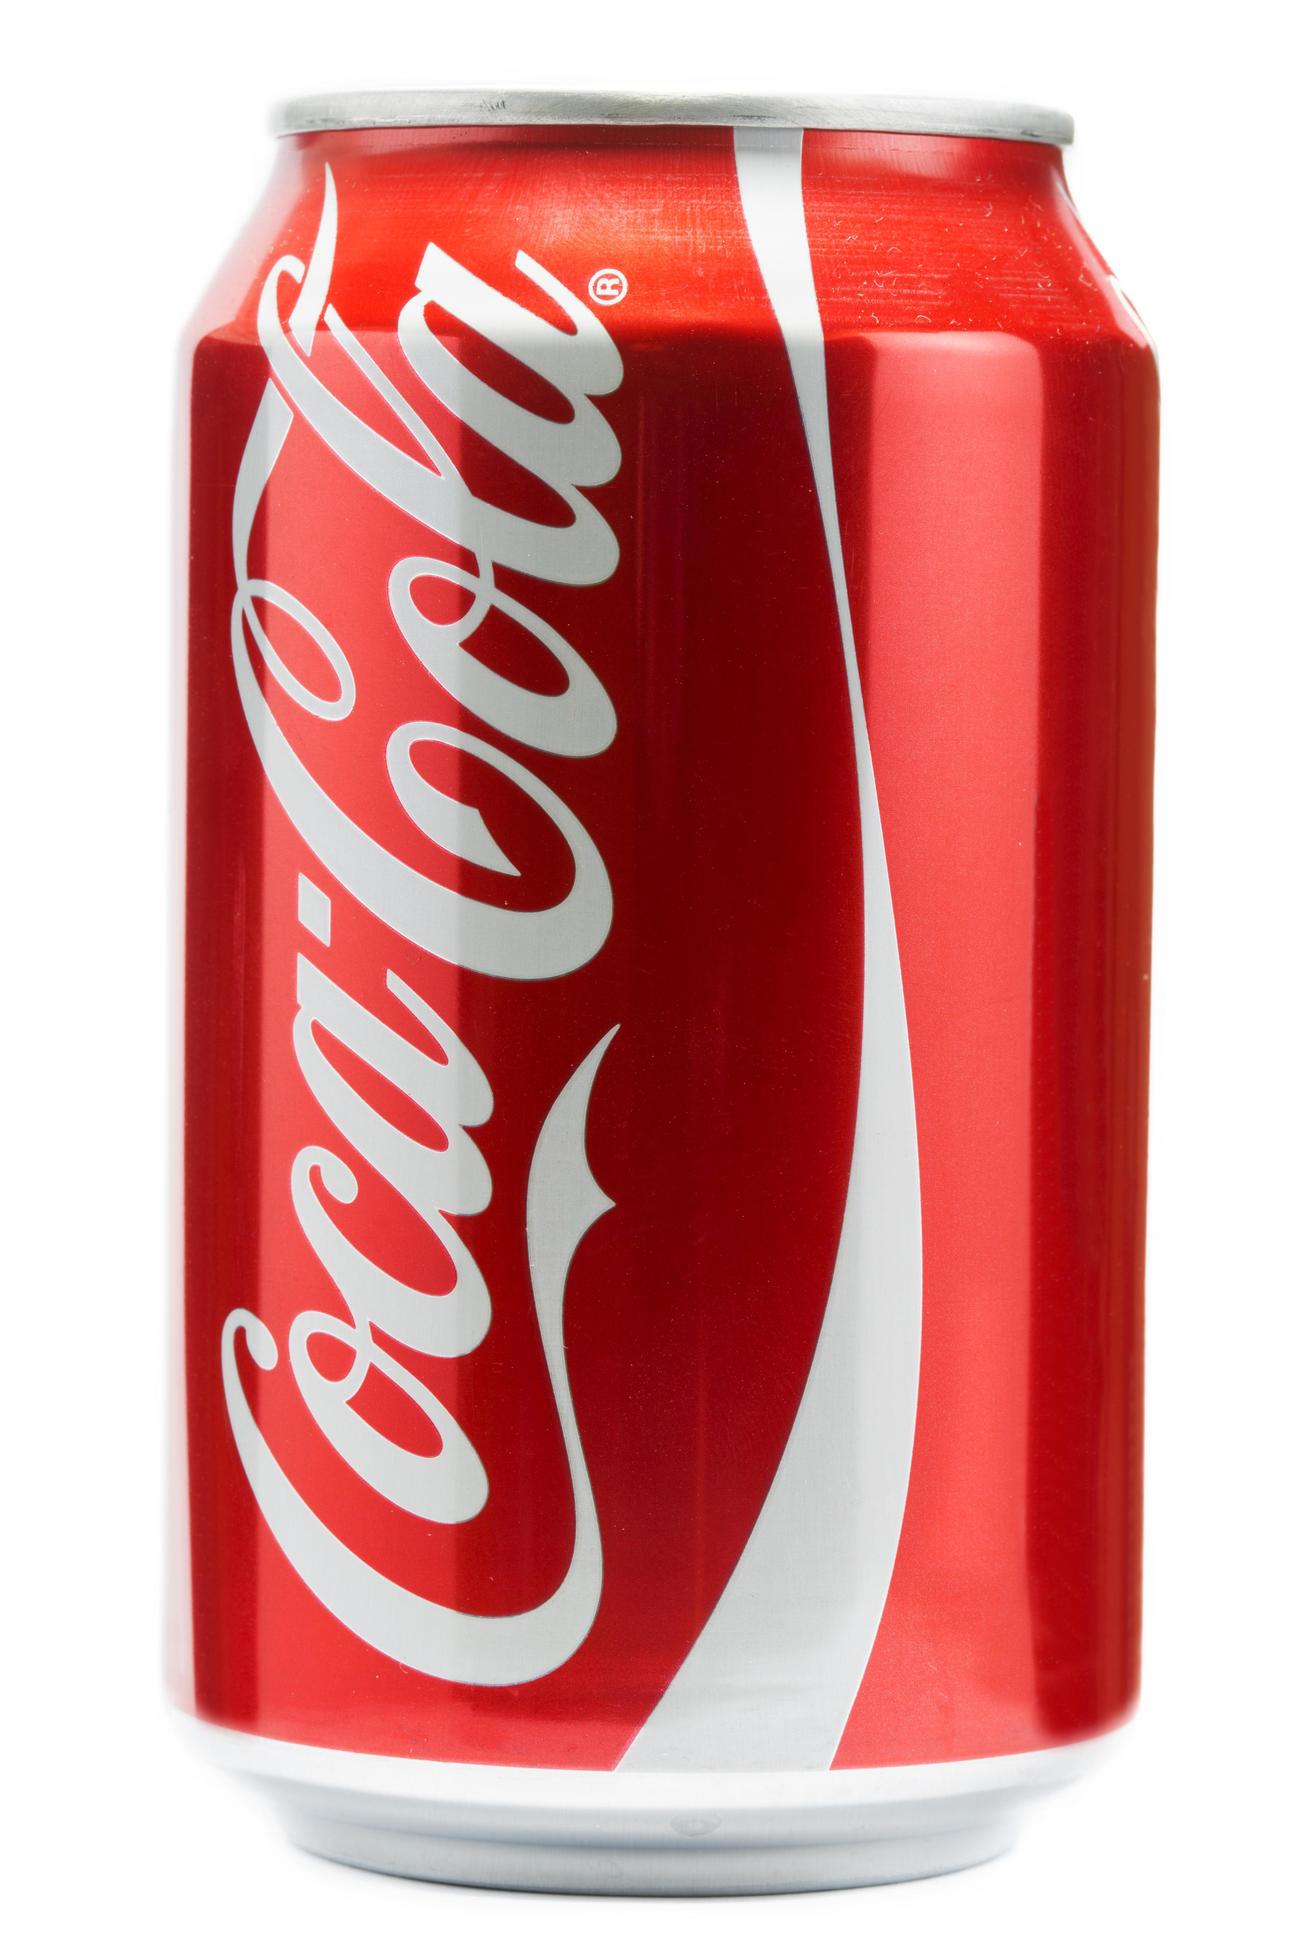 BELGRADE, SERBIA, 2014 - Can of Coca-Cola with white background. Coca-Cola  is a carbonated soft drink produced by The Coca-Cola Company of Atlanta,  Georgia. 4805923 Stock Photo at Vecteezy